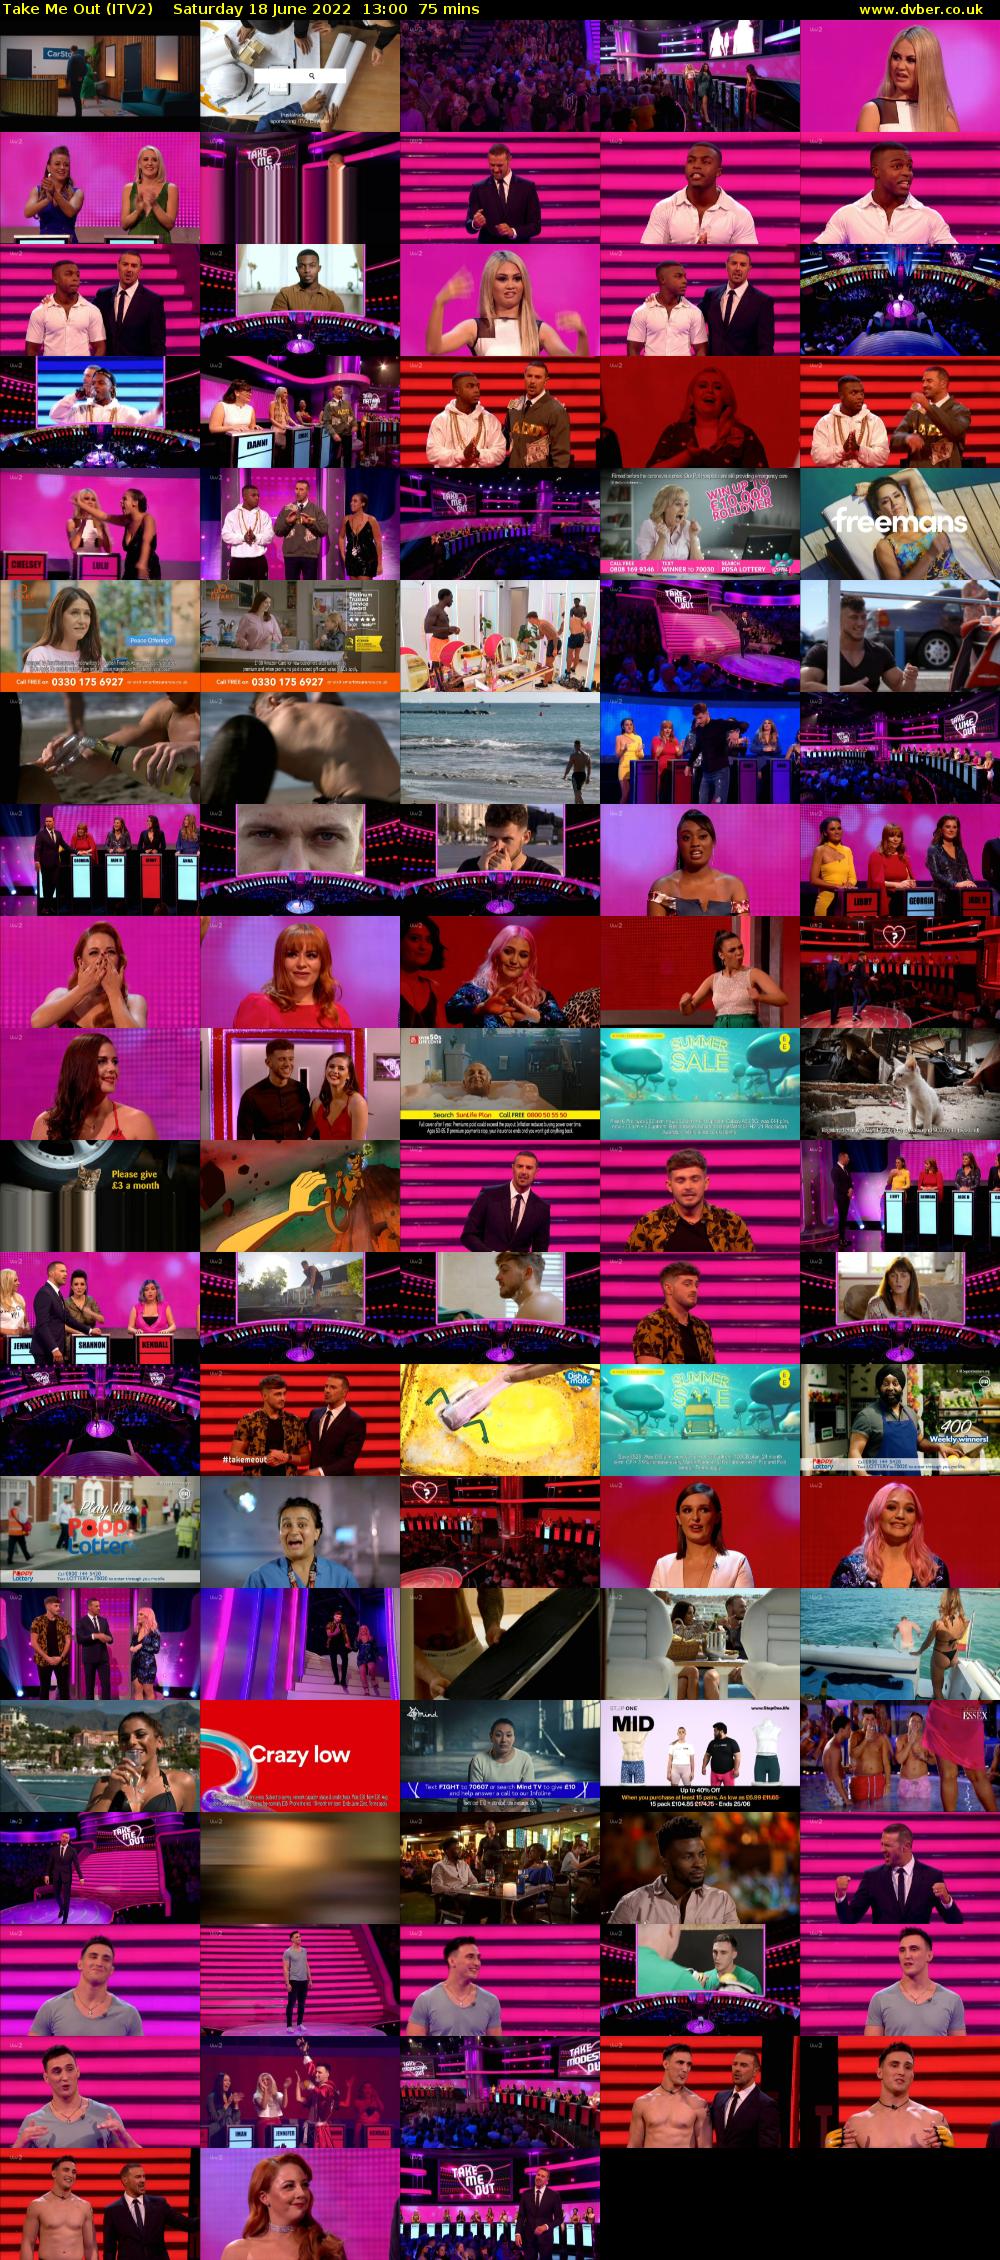 Take Me Out (ITV2) Saturday 18 June 2022 13:00 - 14:15